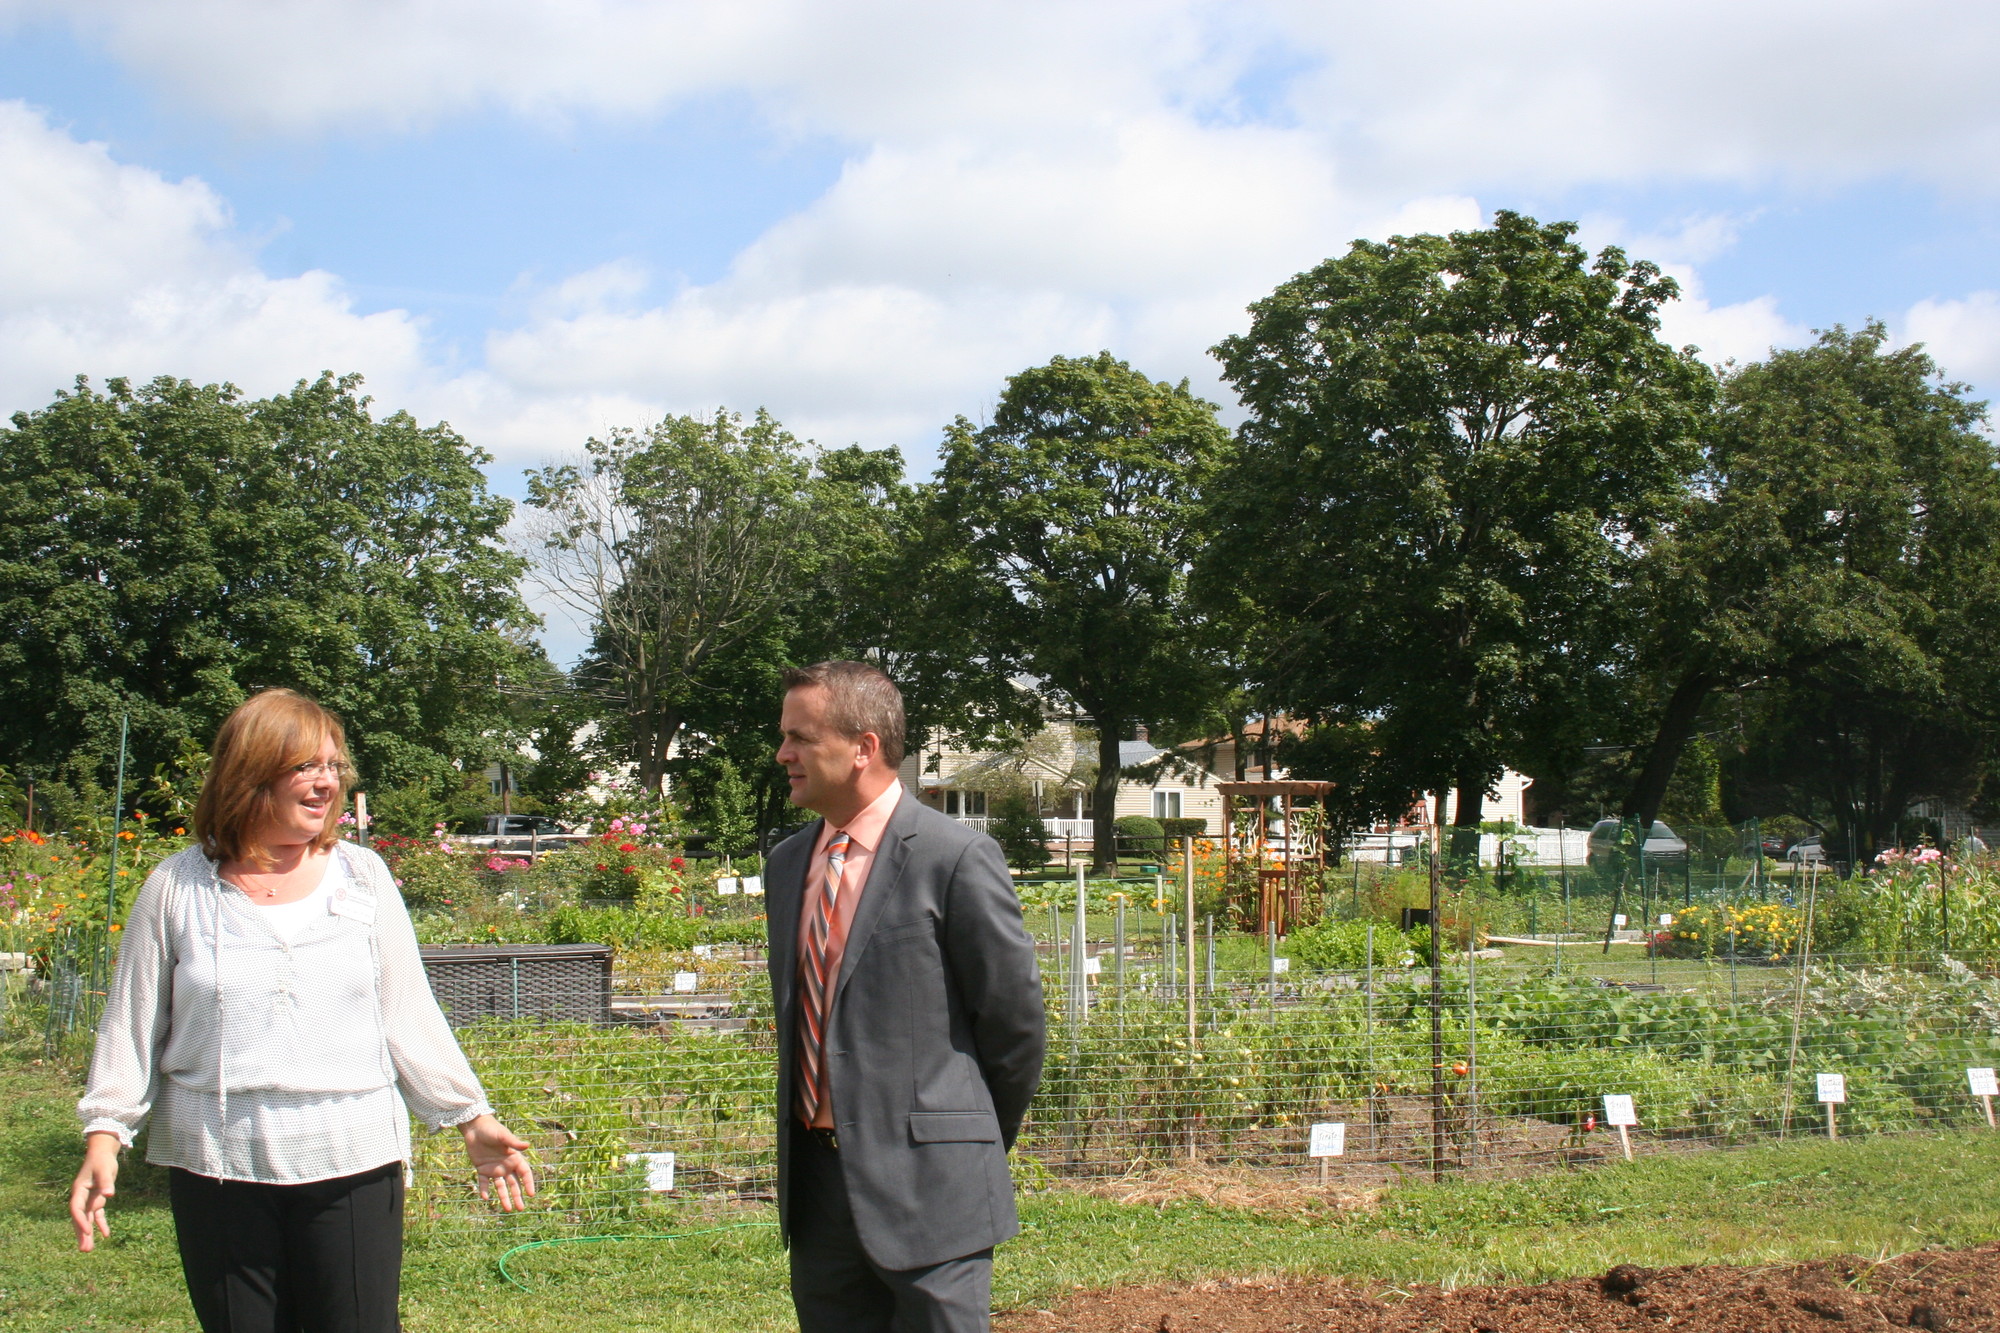 Cornell Cooperative Extension Horticulturist and Community Educator Bonnie Klein described the purpose of each garden to New York American Water Vice President of Operations Brian Bruce at the East Meadow Farm. NYAW donated $5,000 to CCE for its initiative to grow native plants.